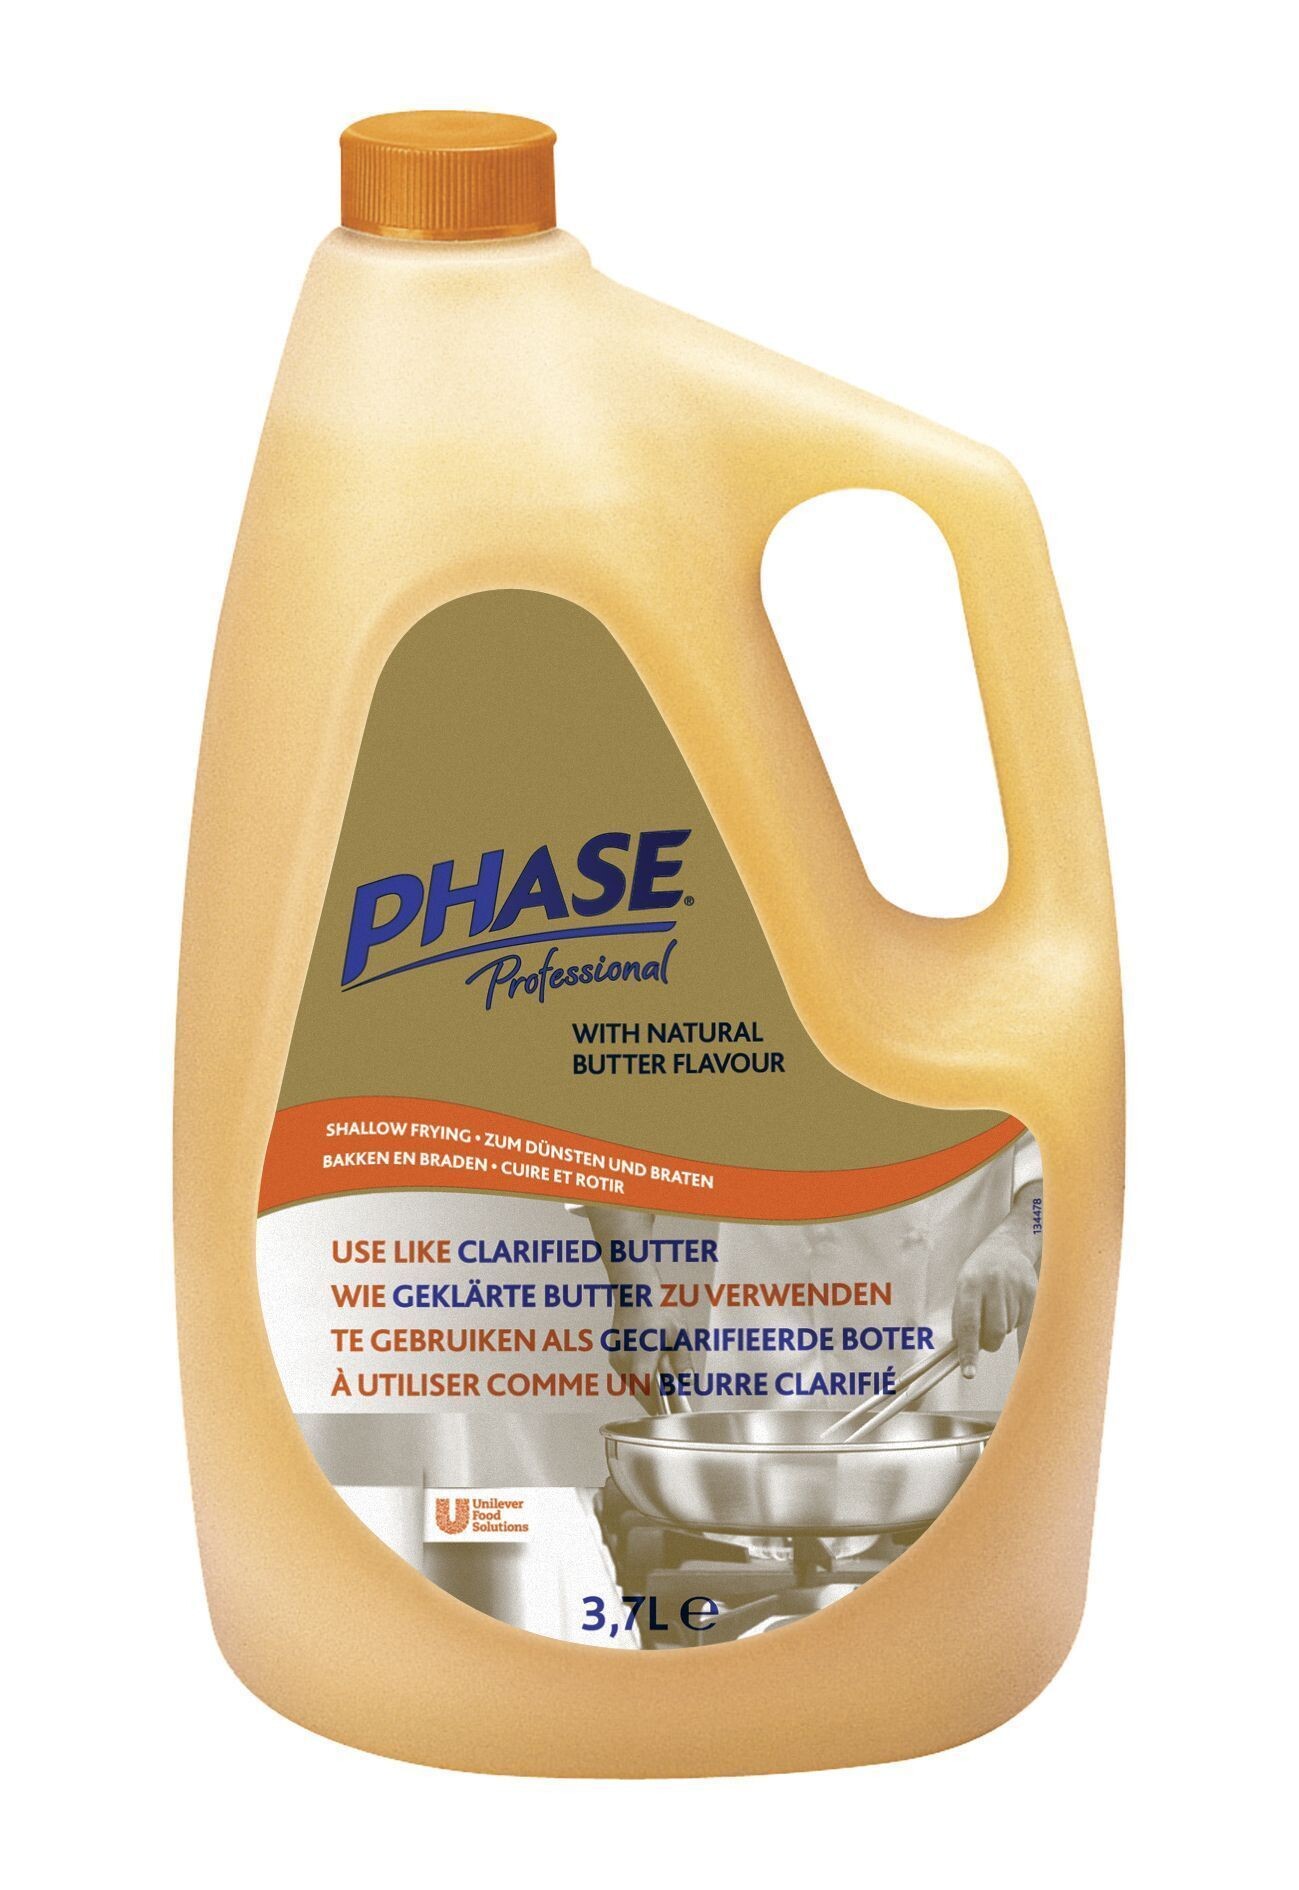 Phase Butter Flavour 3.7L 